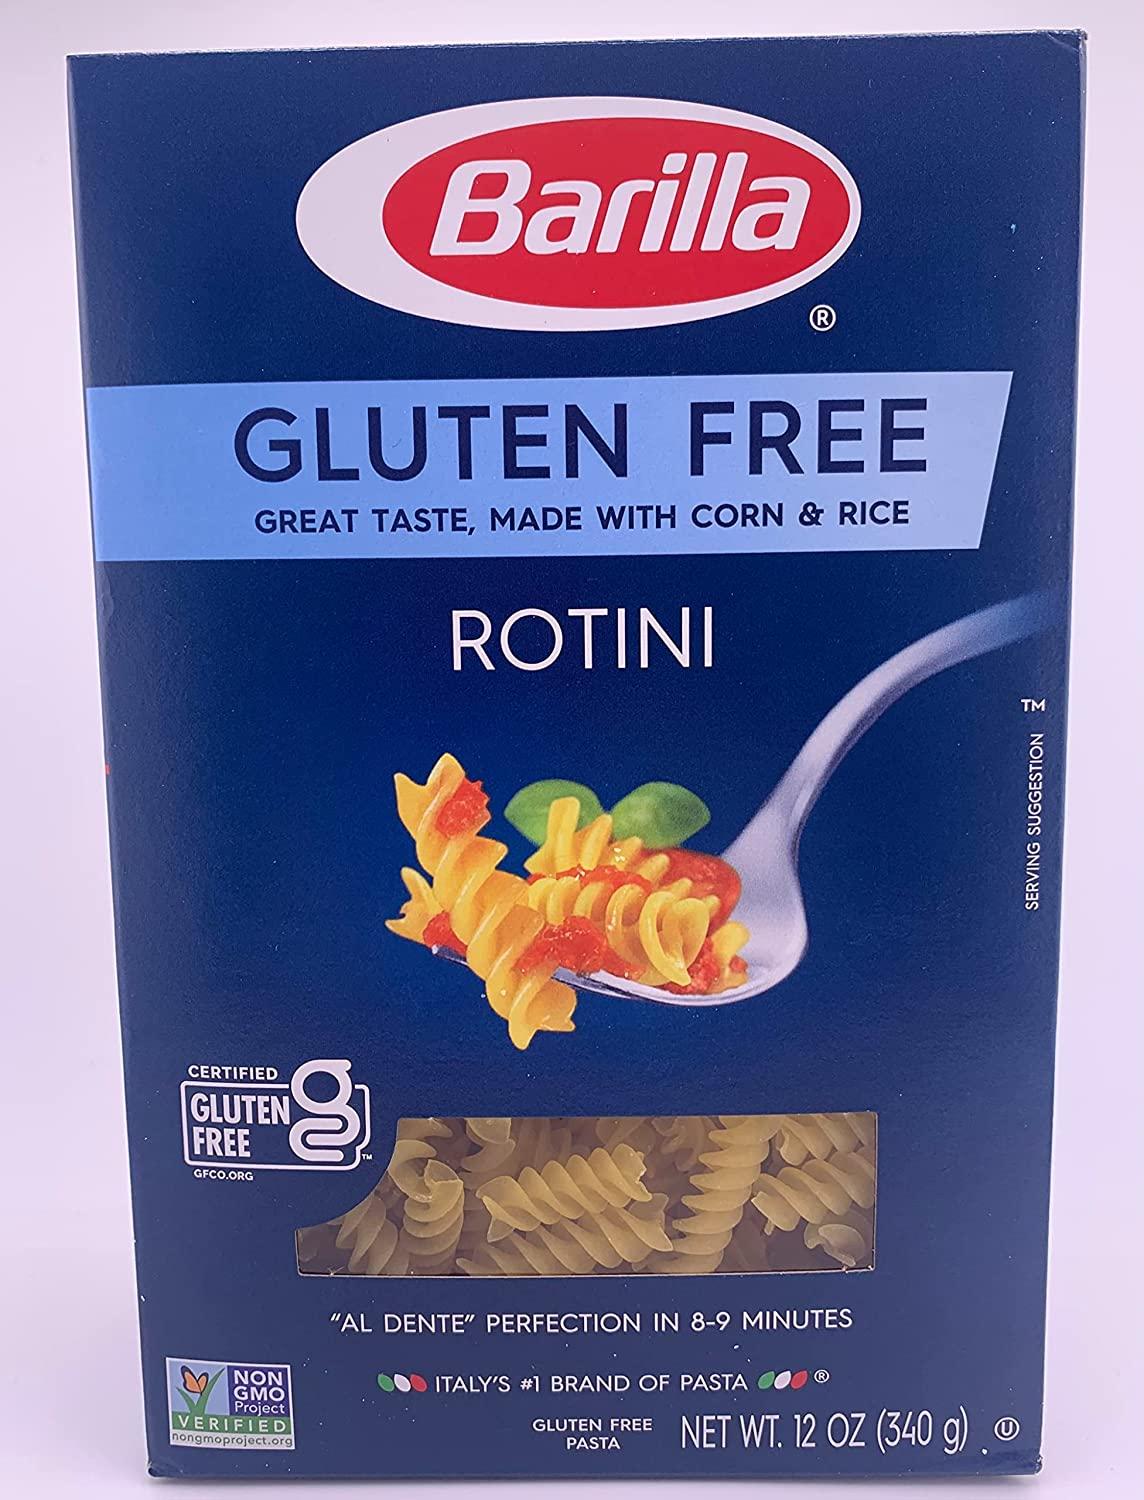 Includes Pasta Rotini Candy Pasta Penne Set Elbow Pasta Gluten Noodles. Barilla Inspired (3 Variety Pasta, Macaroni Pasta, Barilla and Free by Pack- 12oz x Bulk